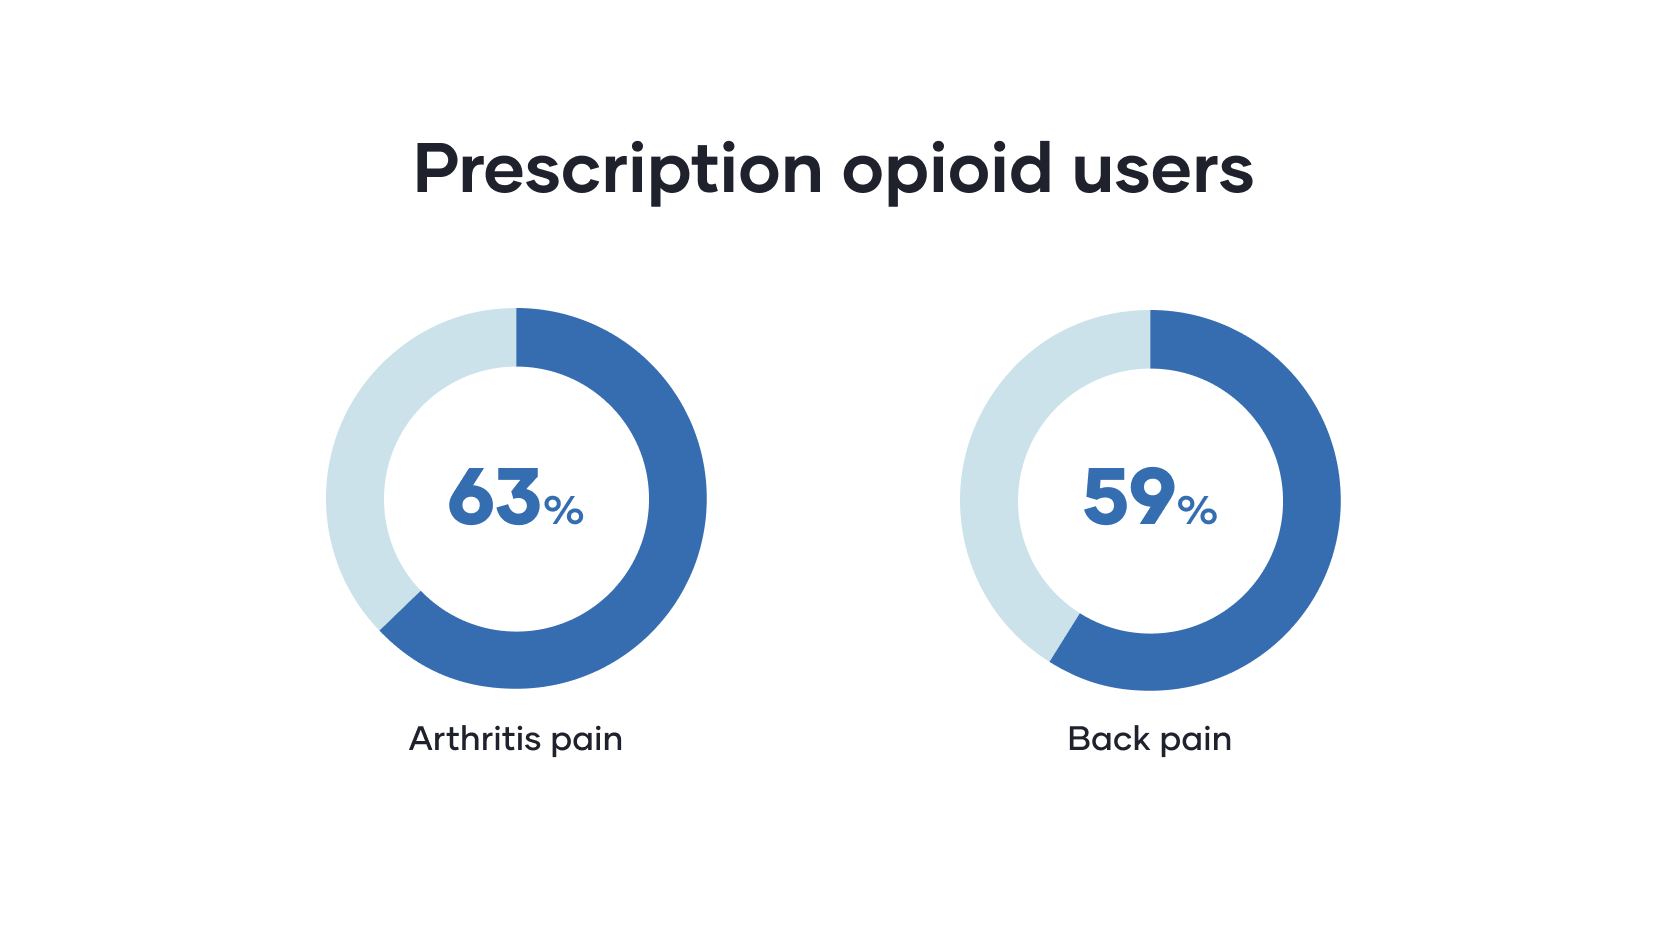 63% of opioids are prescribed for arthritis pain and 59% for back pain